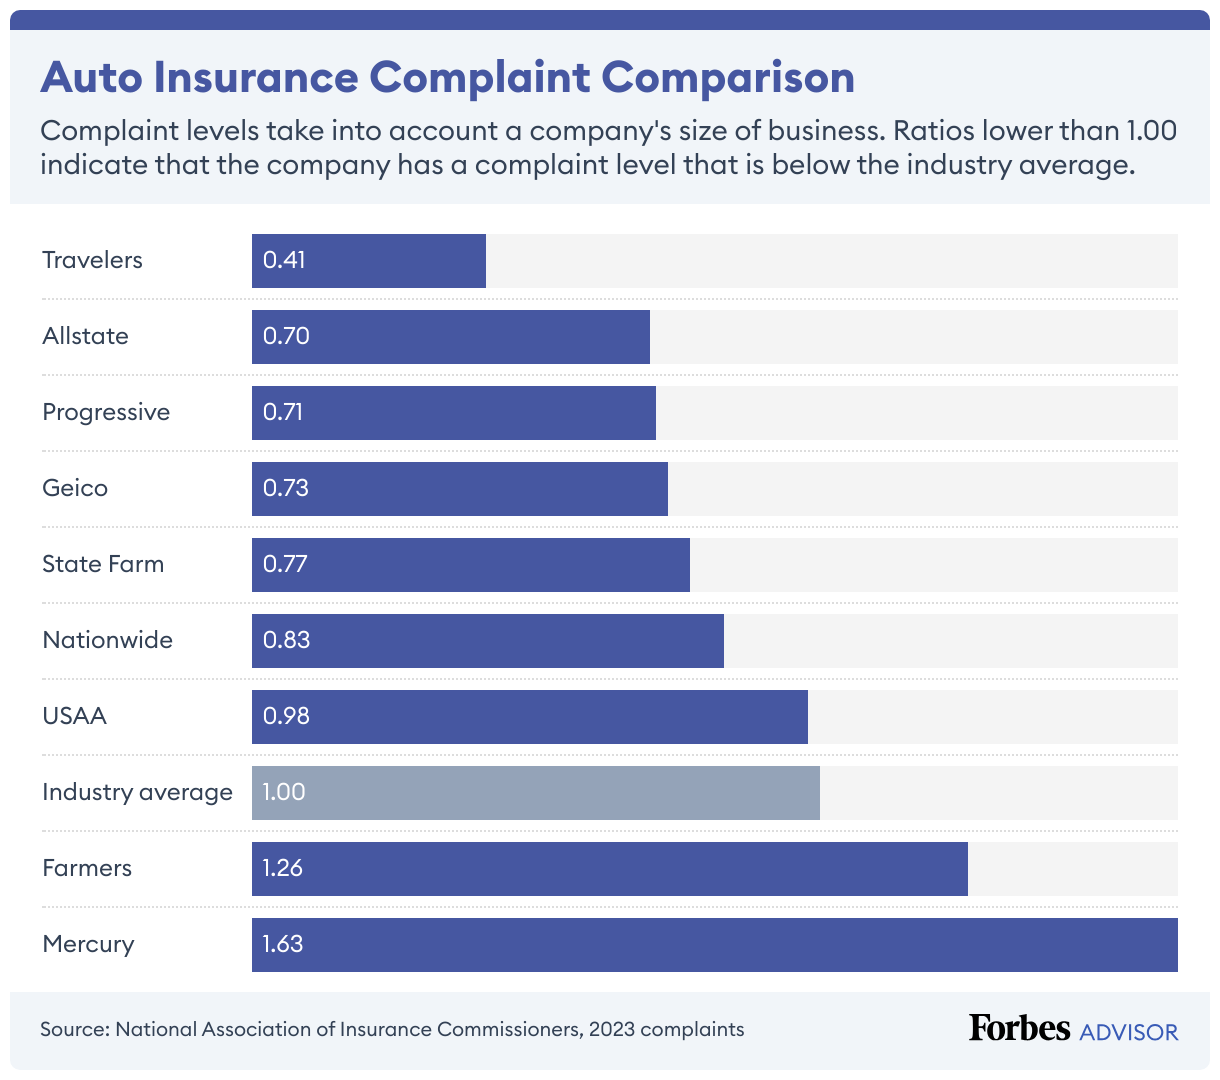 Mercury’s level of car insurance complaints is much higher than the industry average; competitors such as Allstate, Geico and State Farm have far lower complaint levels.